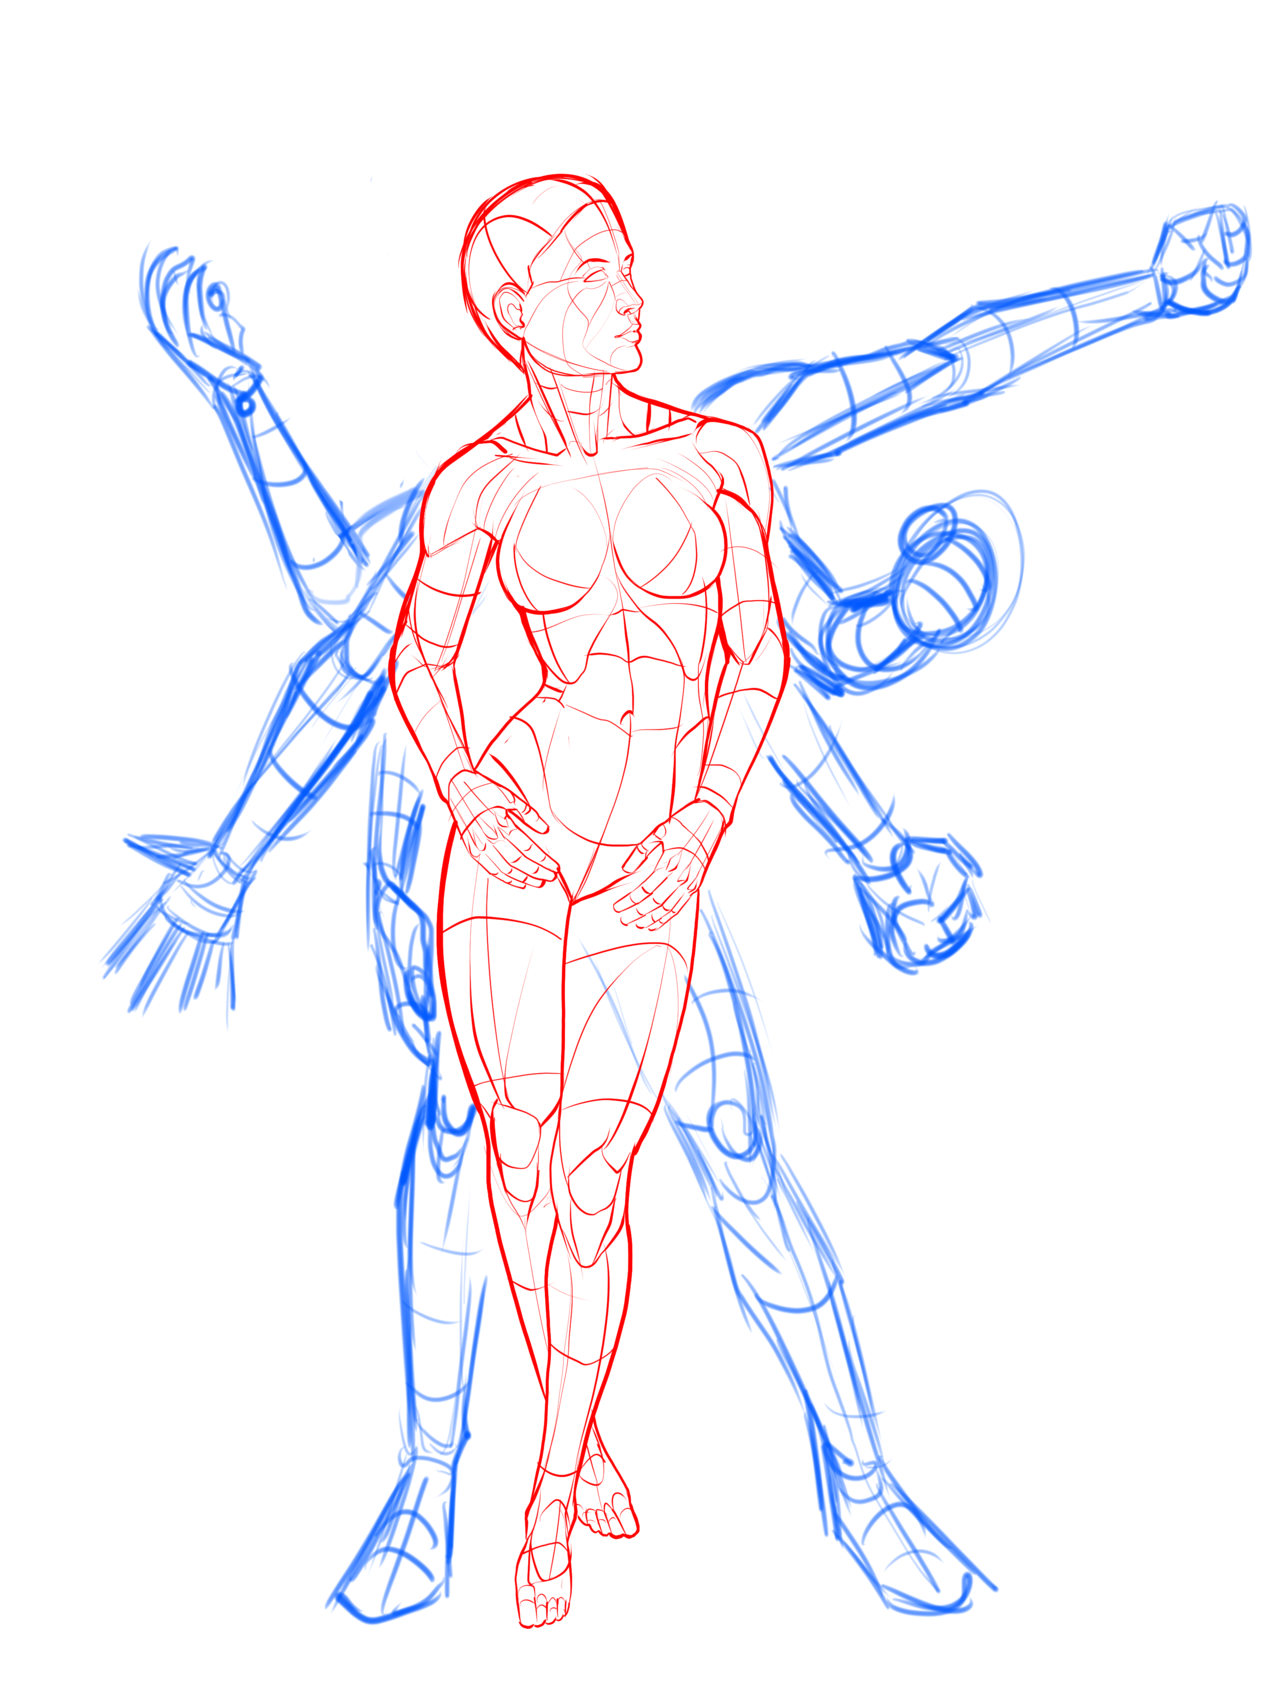 Pose Reference : New pose reference. Enjoy! ~ Justin My Poses for...